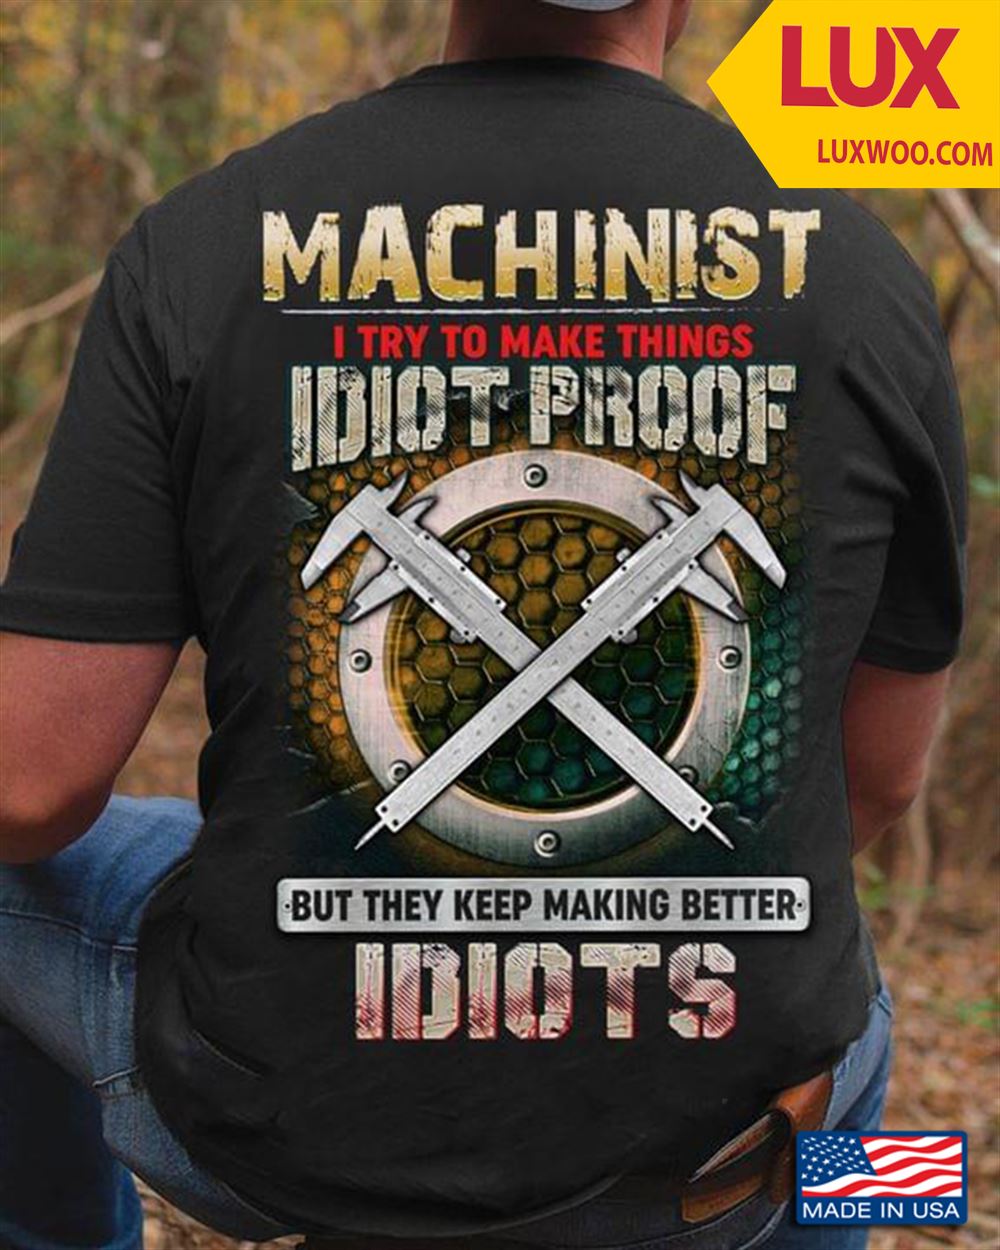 Machinist I Try To Make Things Idiot Proof But They Keep Making Better Idiots Tshirt Size Up To 5xl